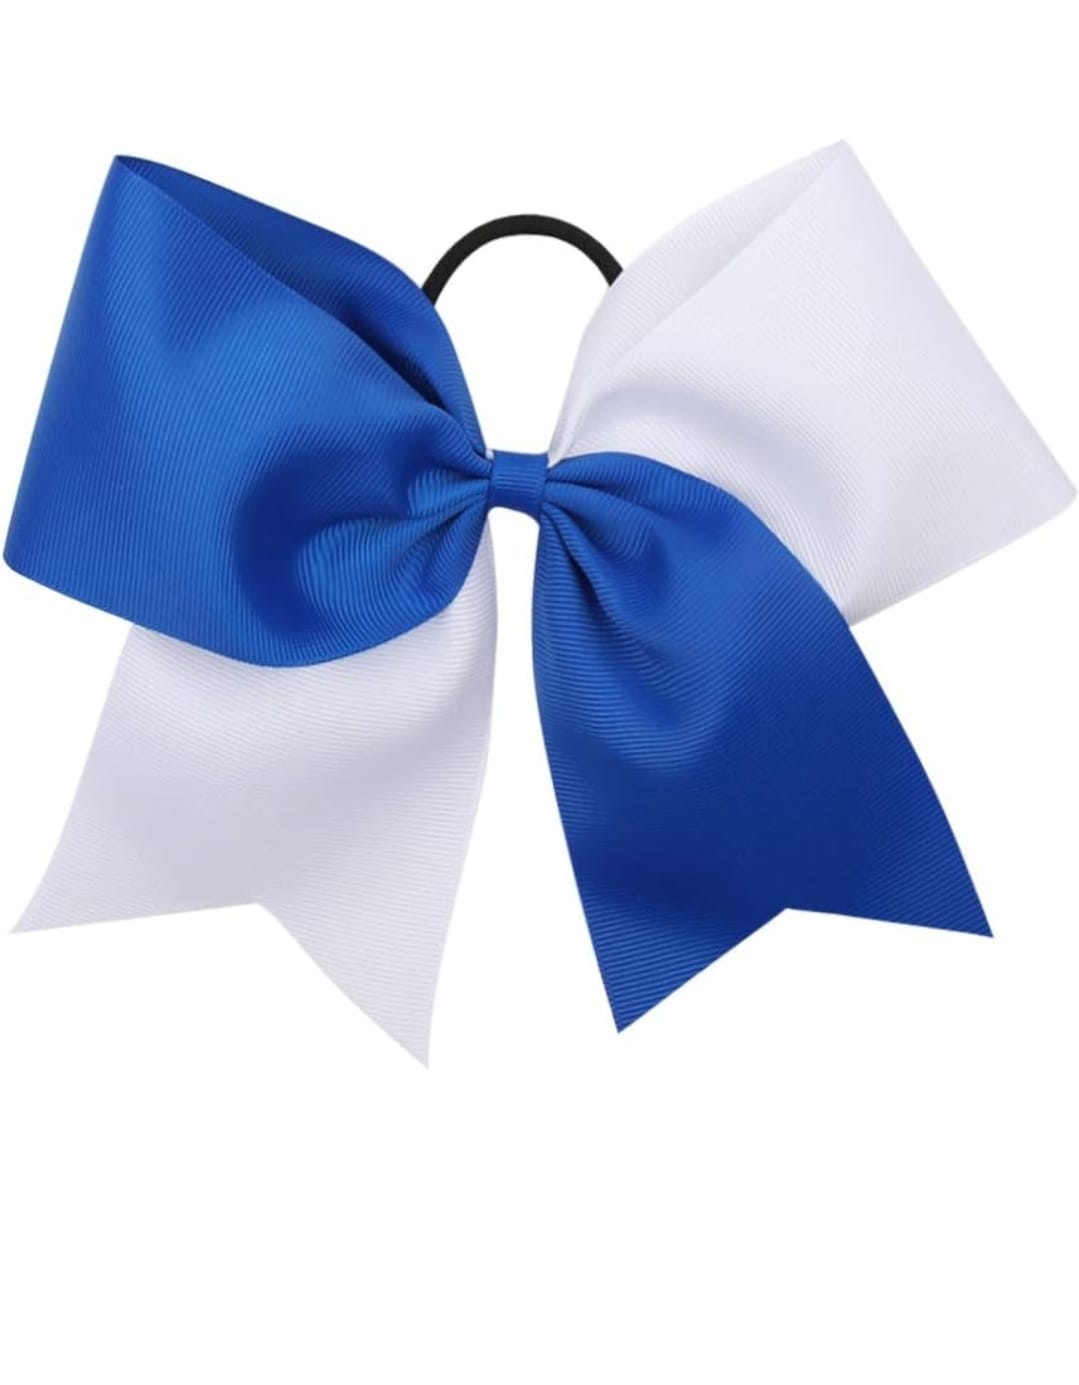 Royal blue and white  Cheer Bow